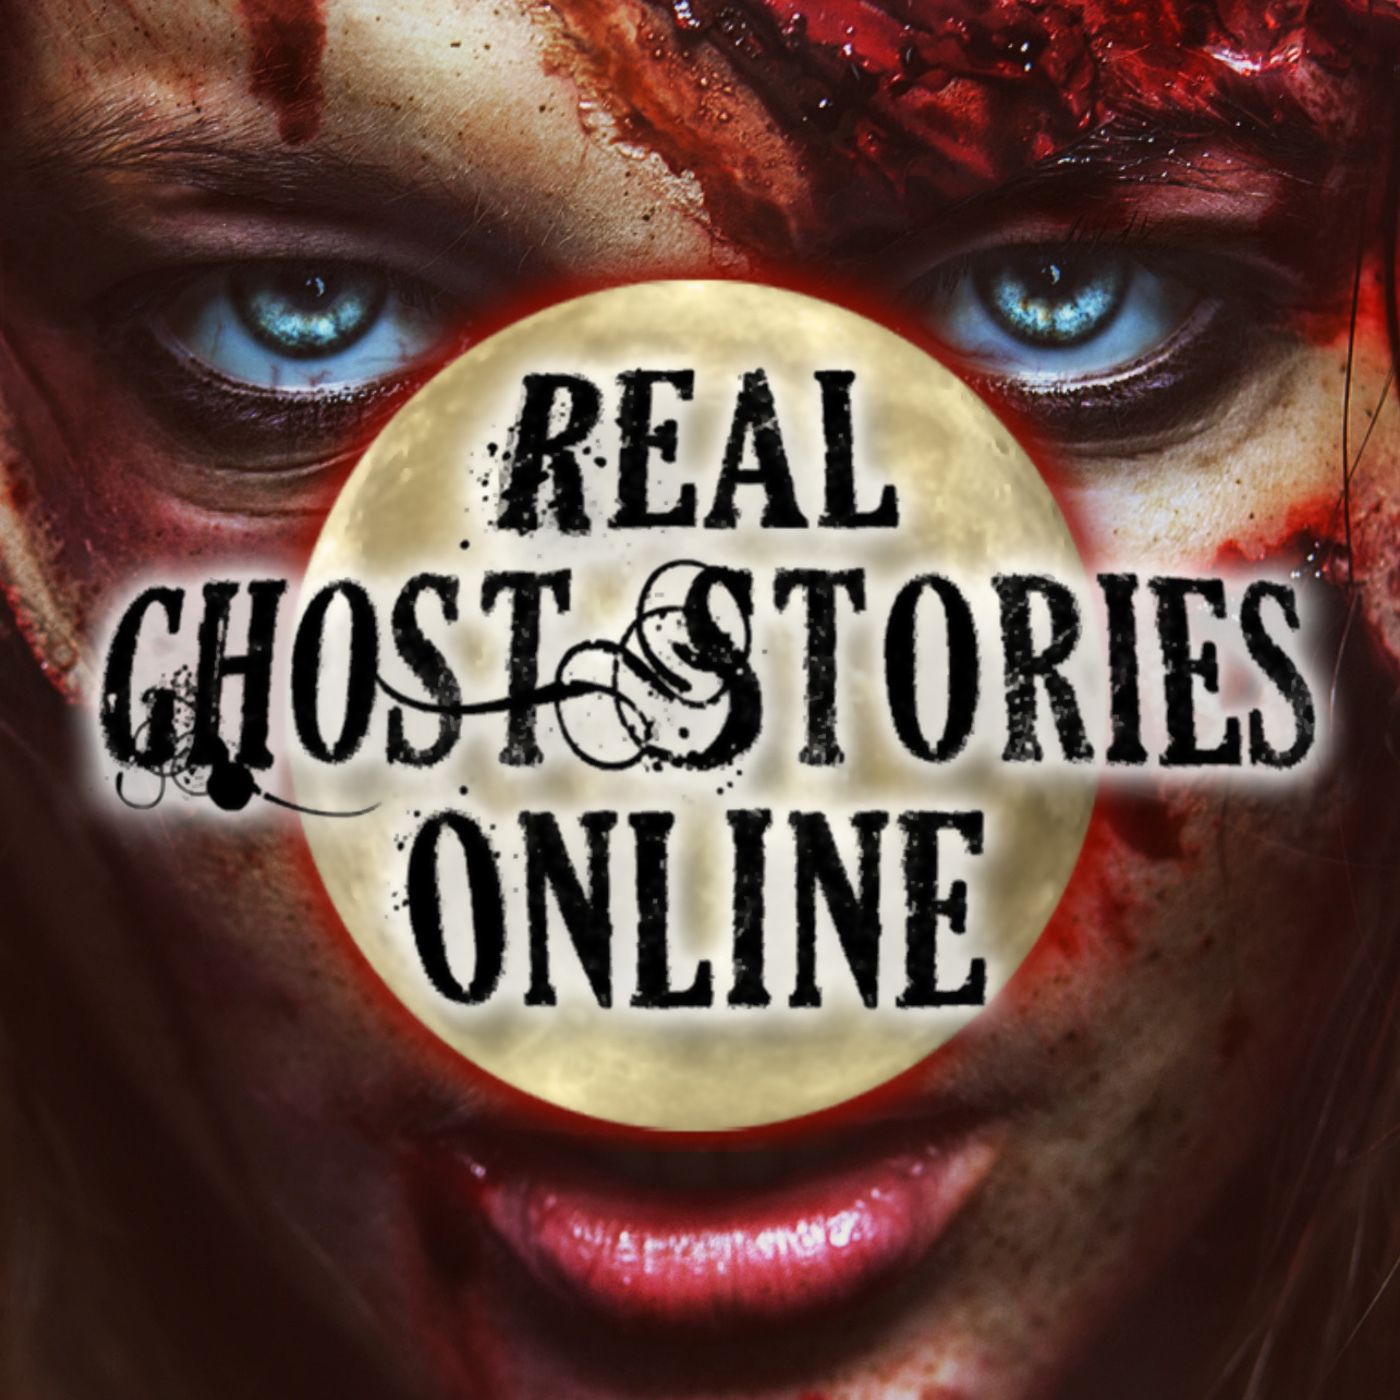 The Previous Tenants | Real Ghost Stories Online